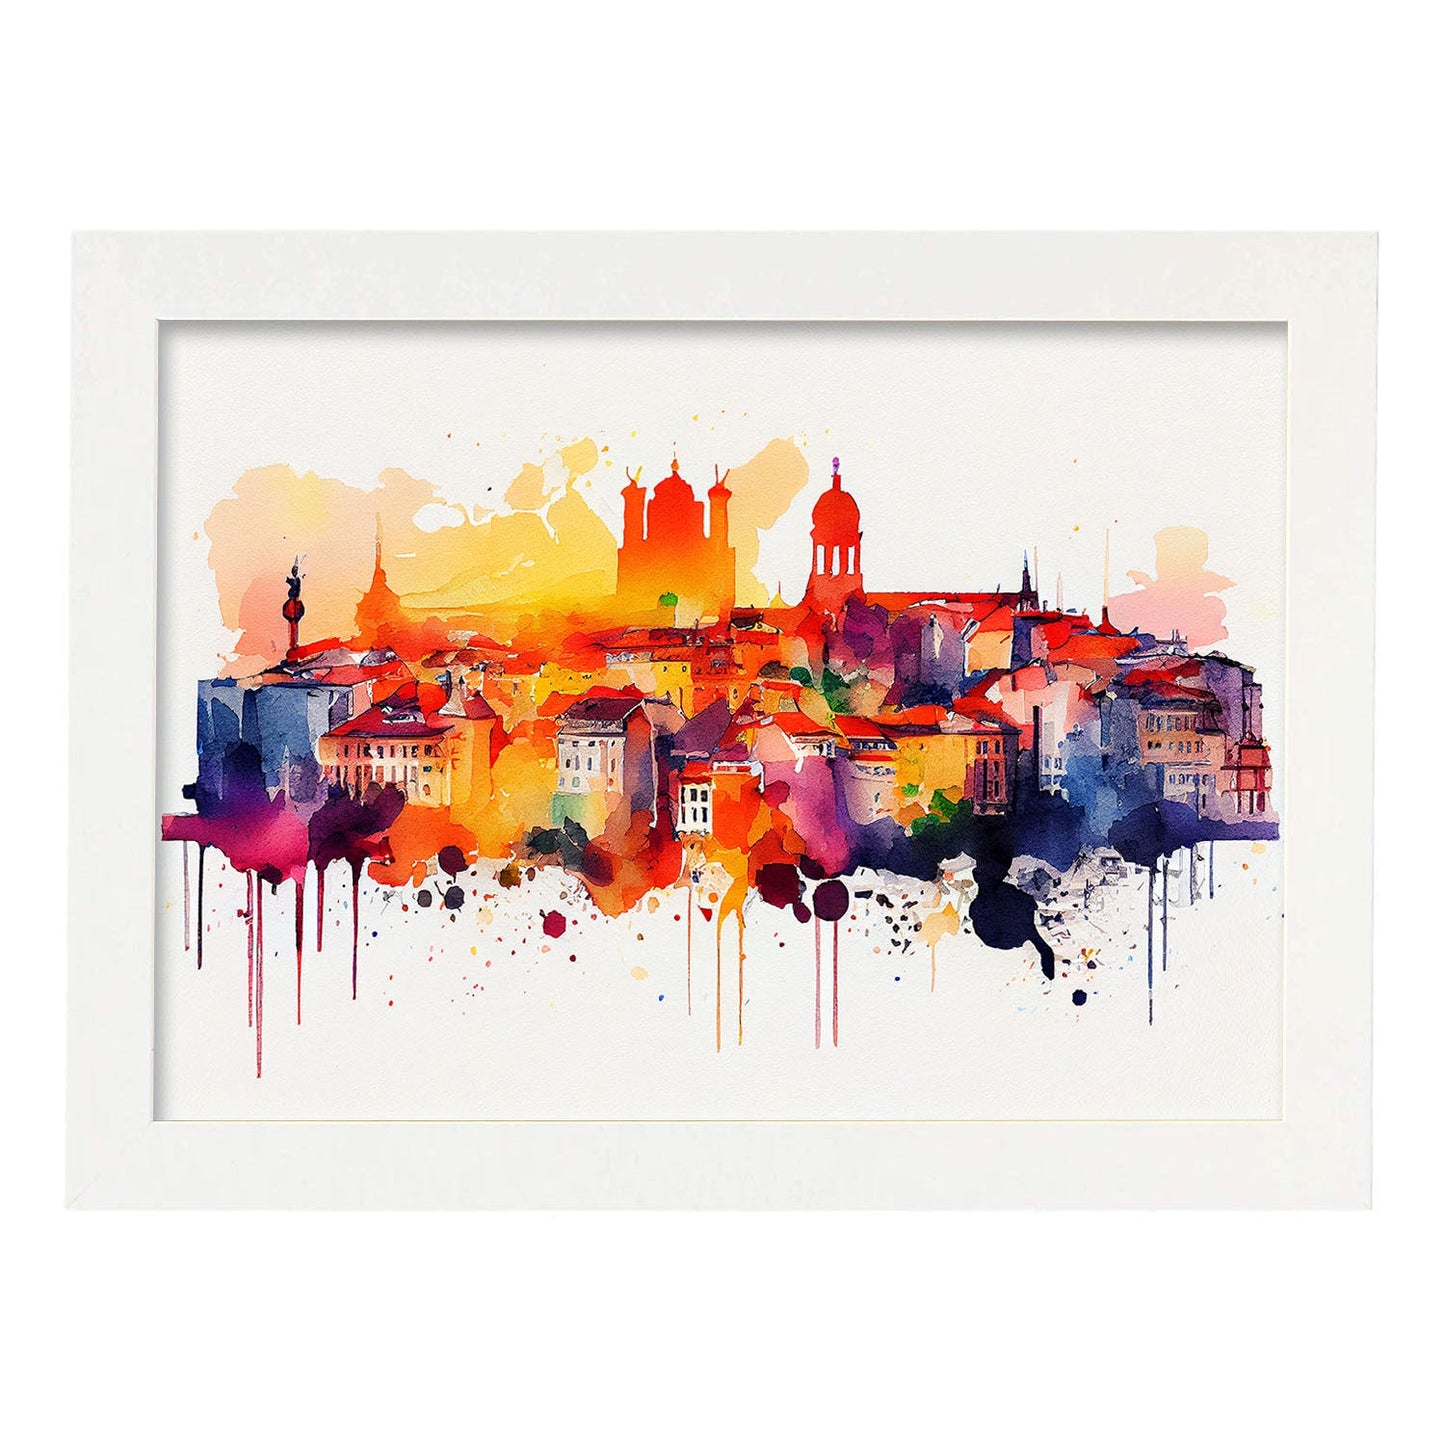 Nacnic watercolor of a skyline of the city of Lisbon_1. Aesthetic Wall Art Prints for Bedroom or Living Room Design.-Artwork-Nacnic-A4-Marco Blanco-Nacnic Estudio SL